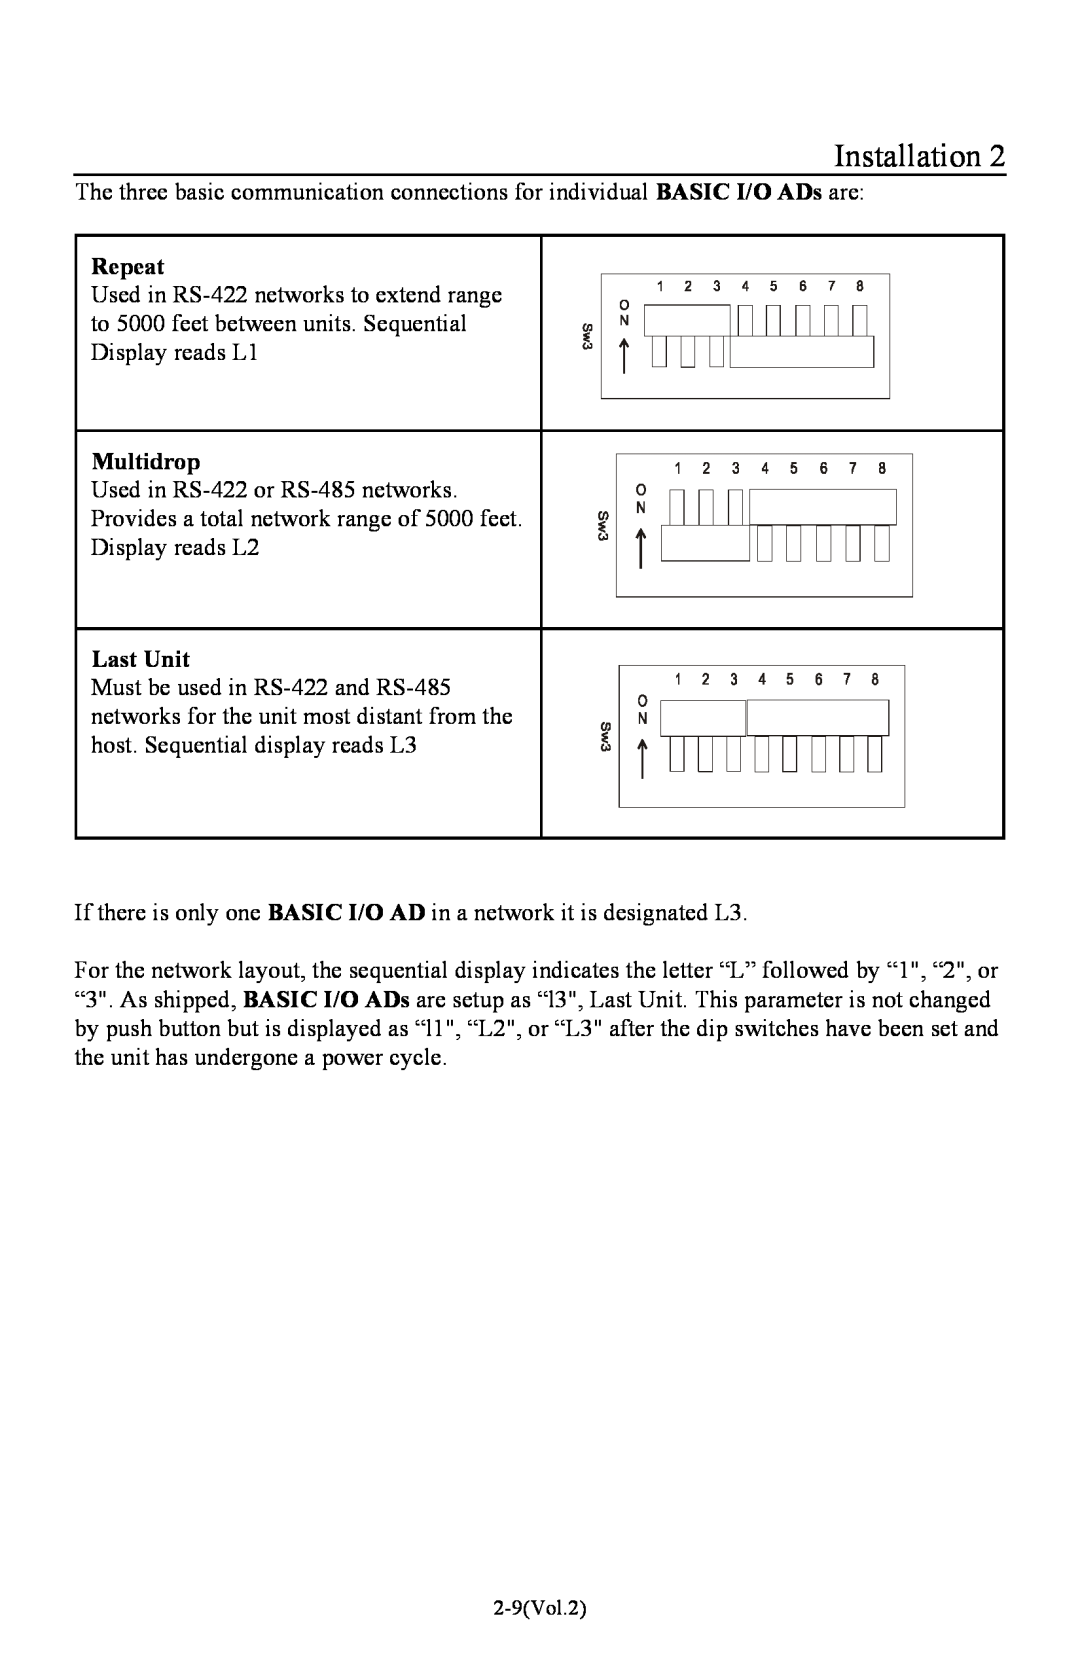 I-O Display Systems Basic I/O Product manual Installation, Repeat, Multidrop, Used in RS-422 or RS-485 networks, Last Unit 